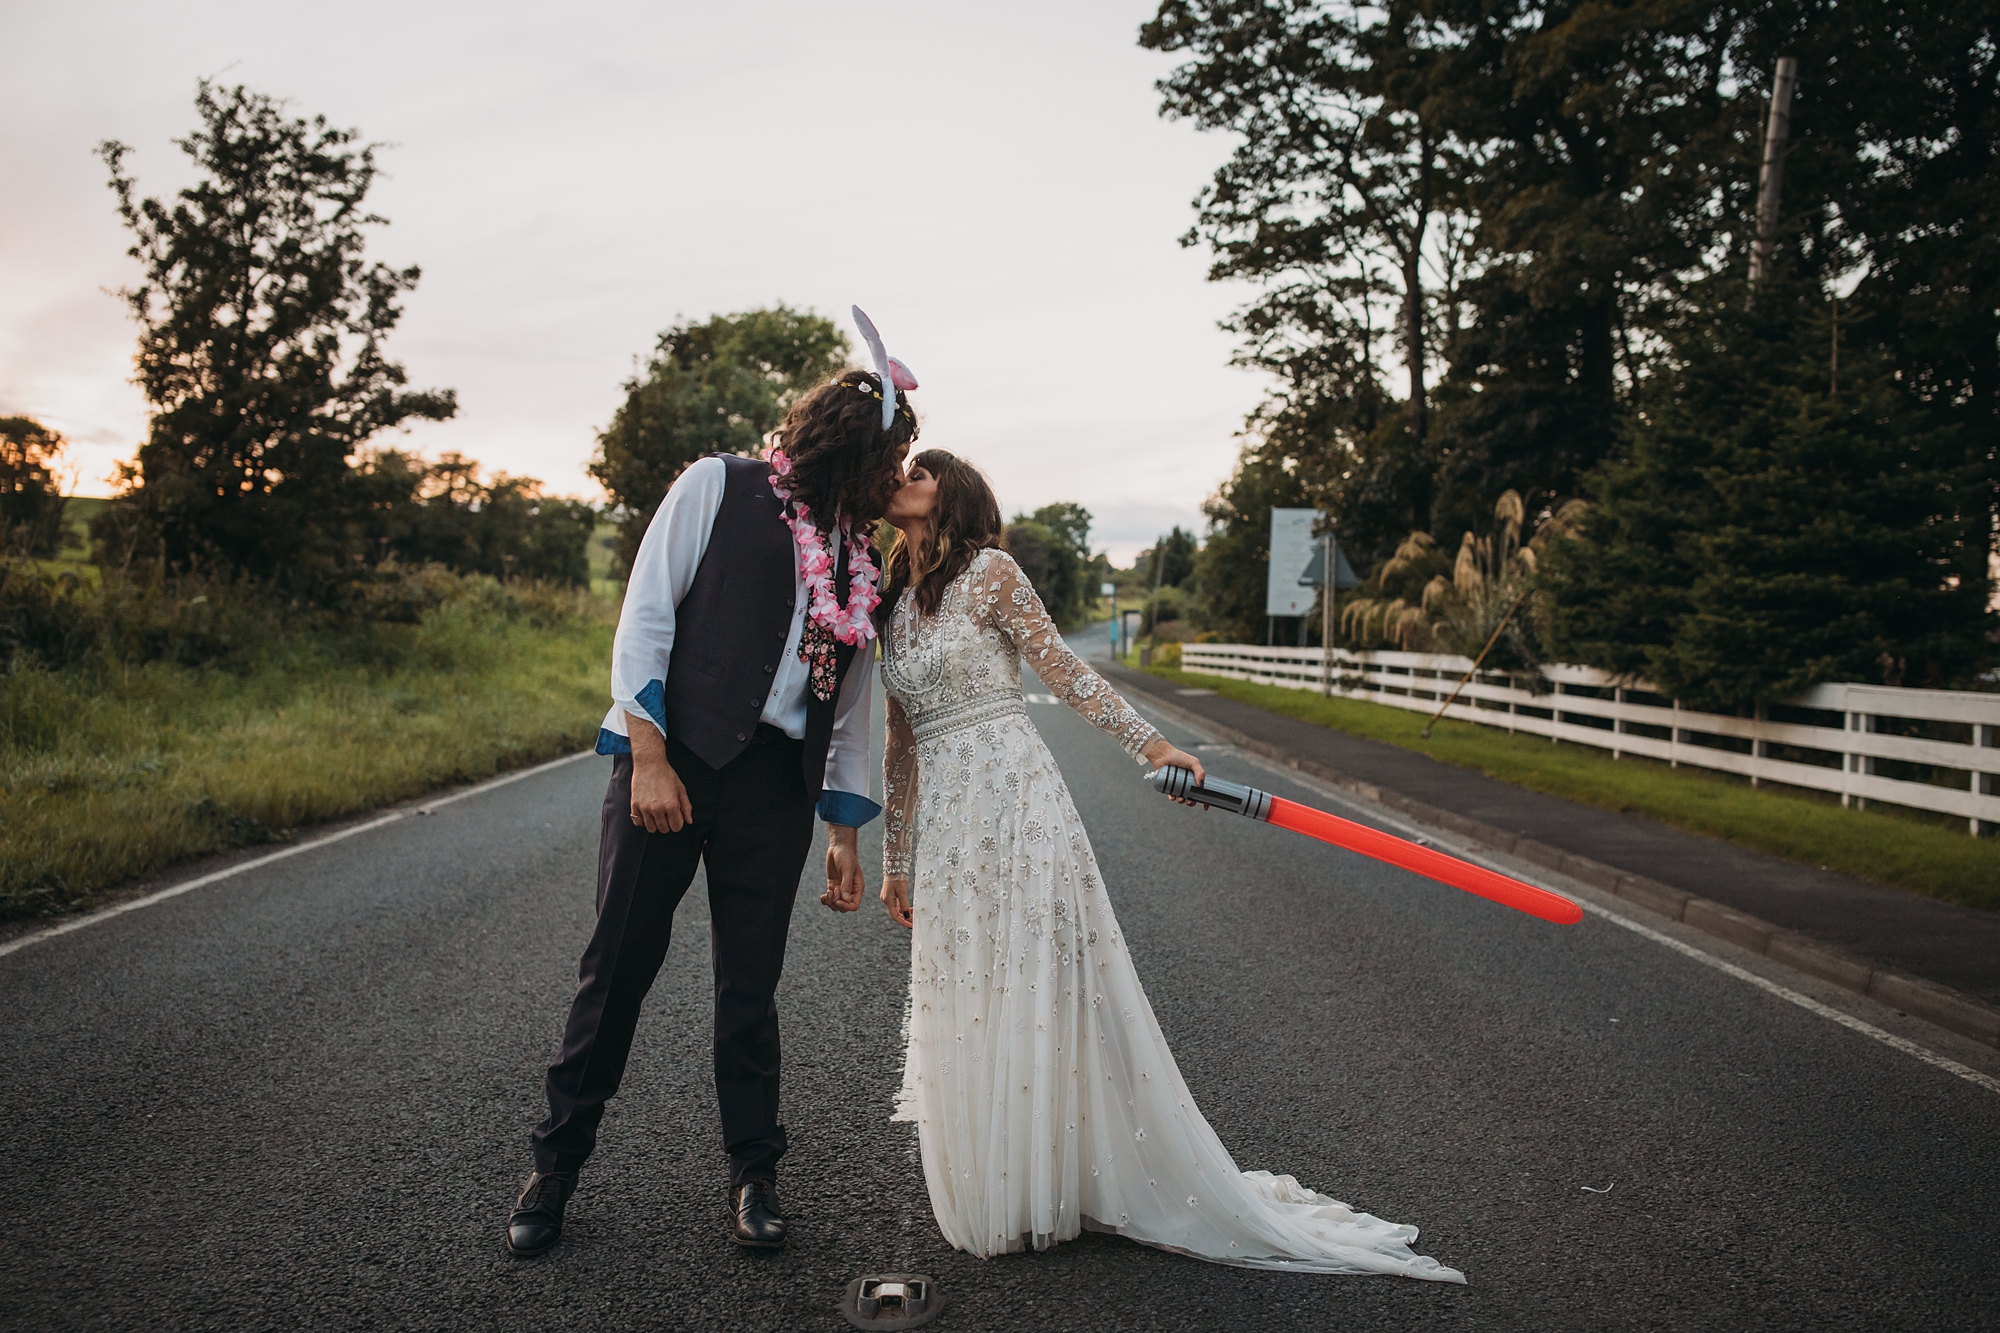 a crazy coupe kiss on a road, she is holding a lightsaber! best wedding photographs